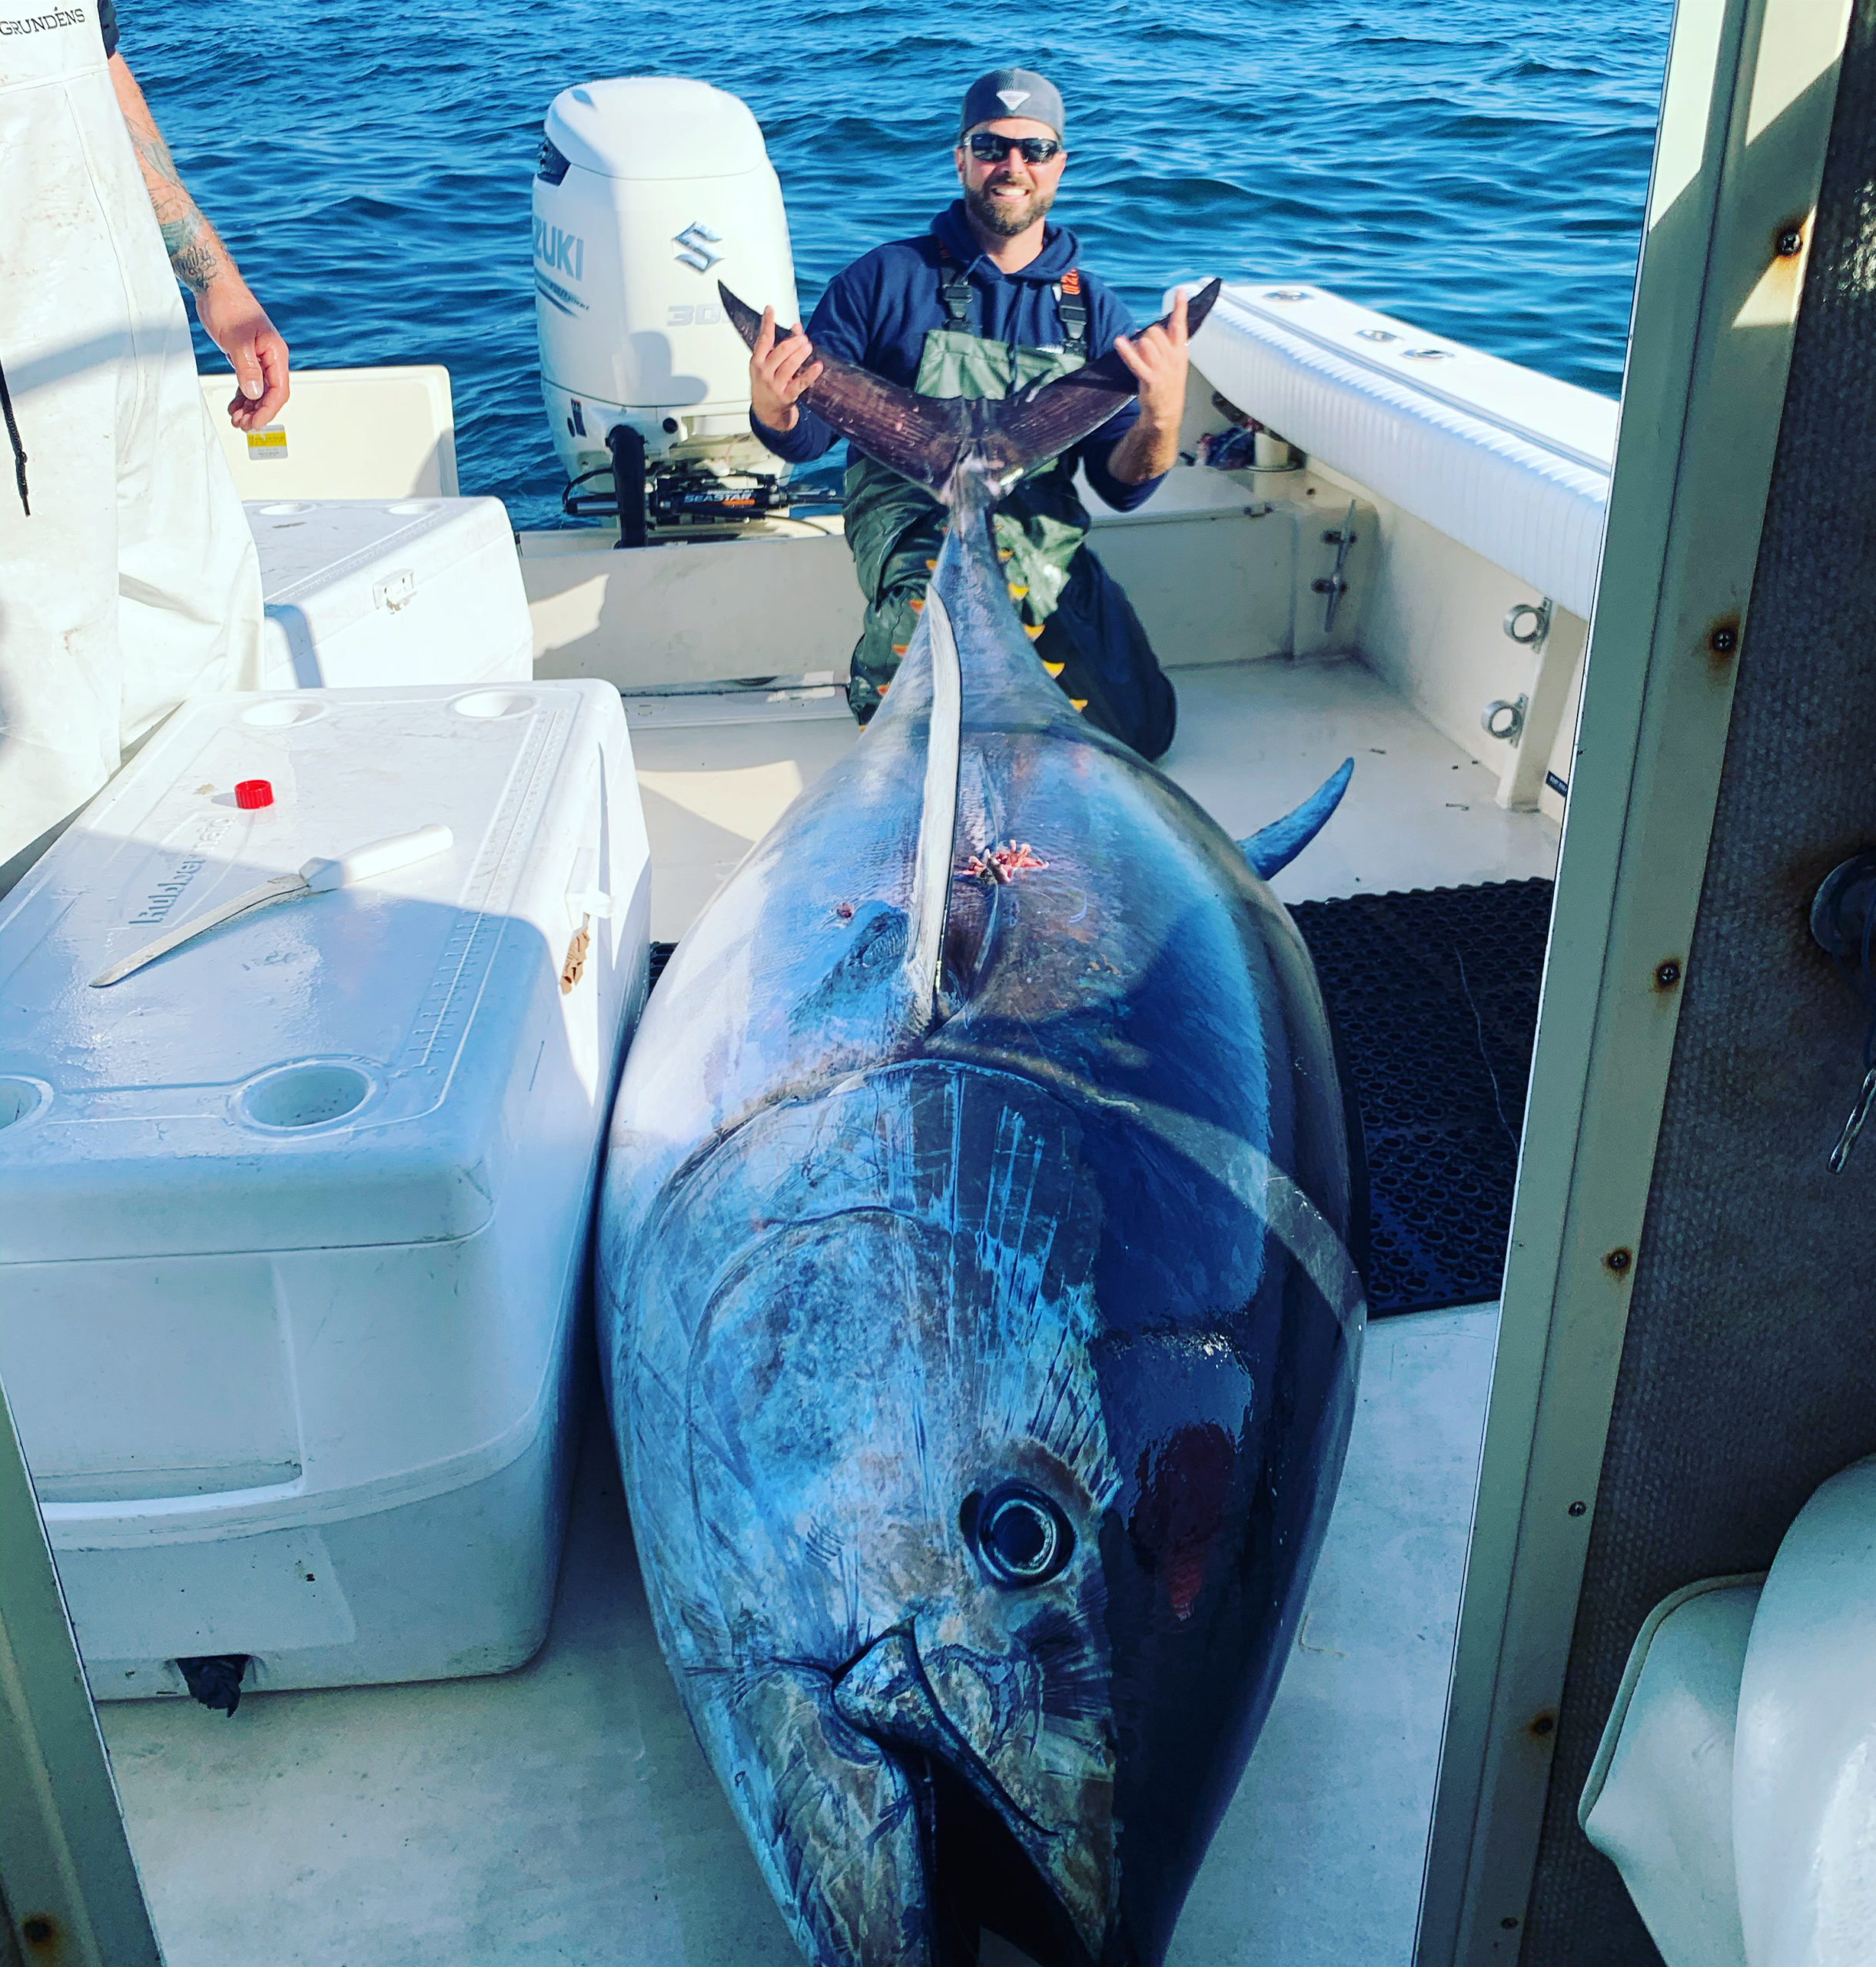 Billy Taylor and crew decked this giant bluefin tuna while fishing aboard his boat out of Hampton Bays over the weekend. 